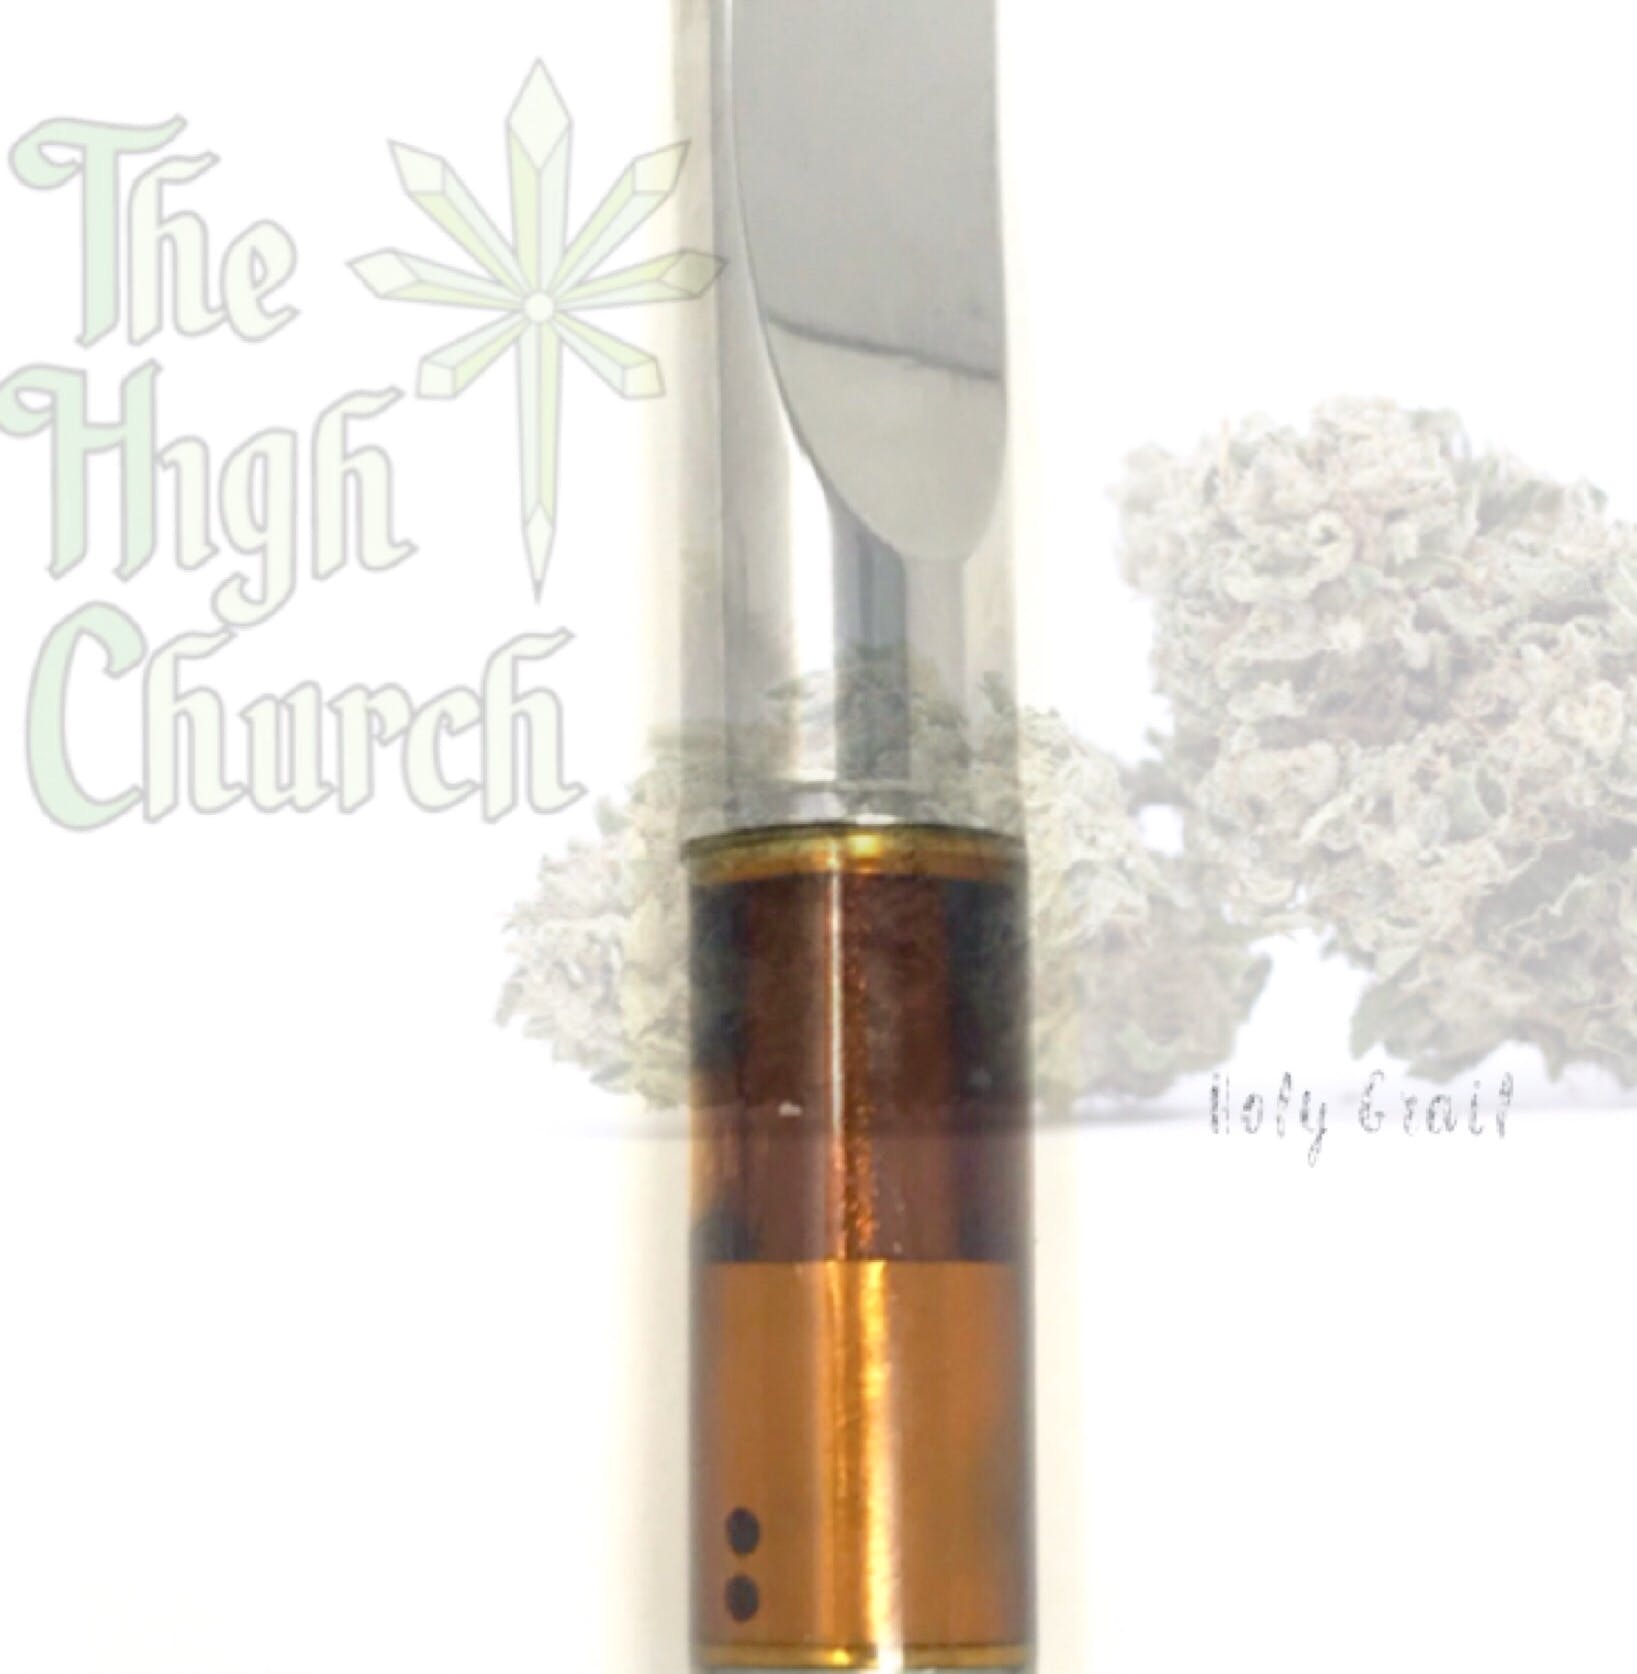 concentrate-the-high-church-co2-strain-specific-cartridge-holy-grail-69-6-25